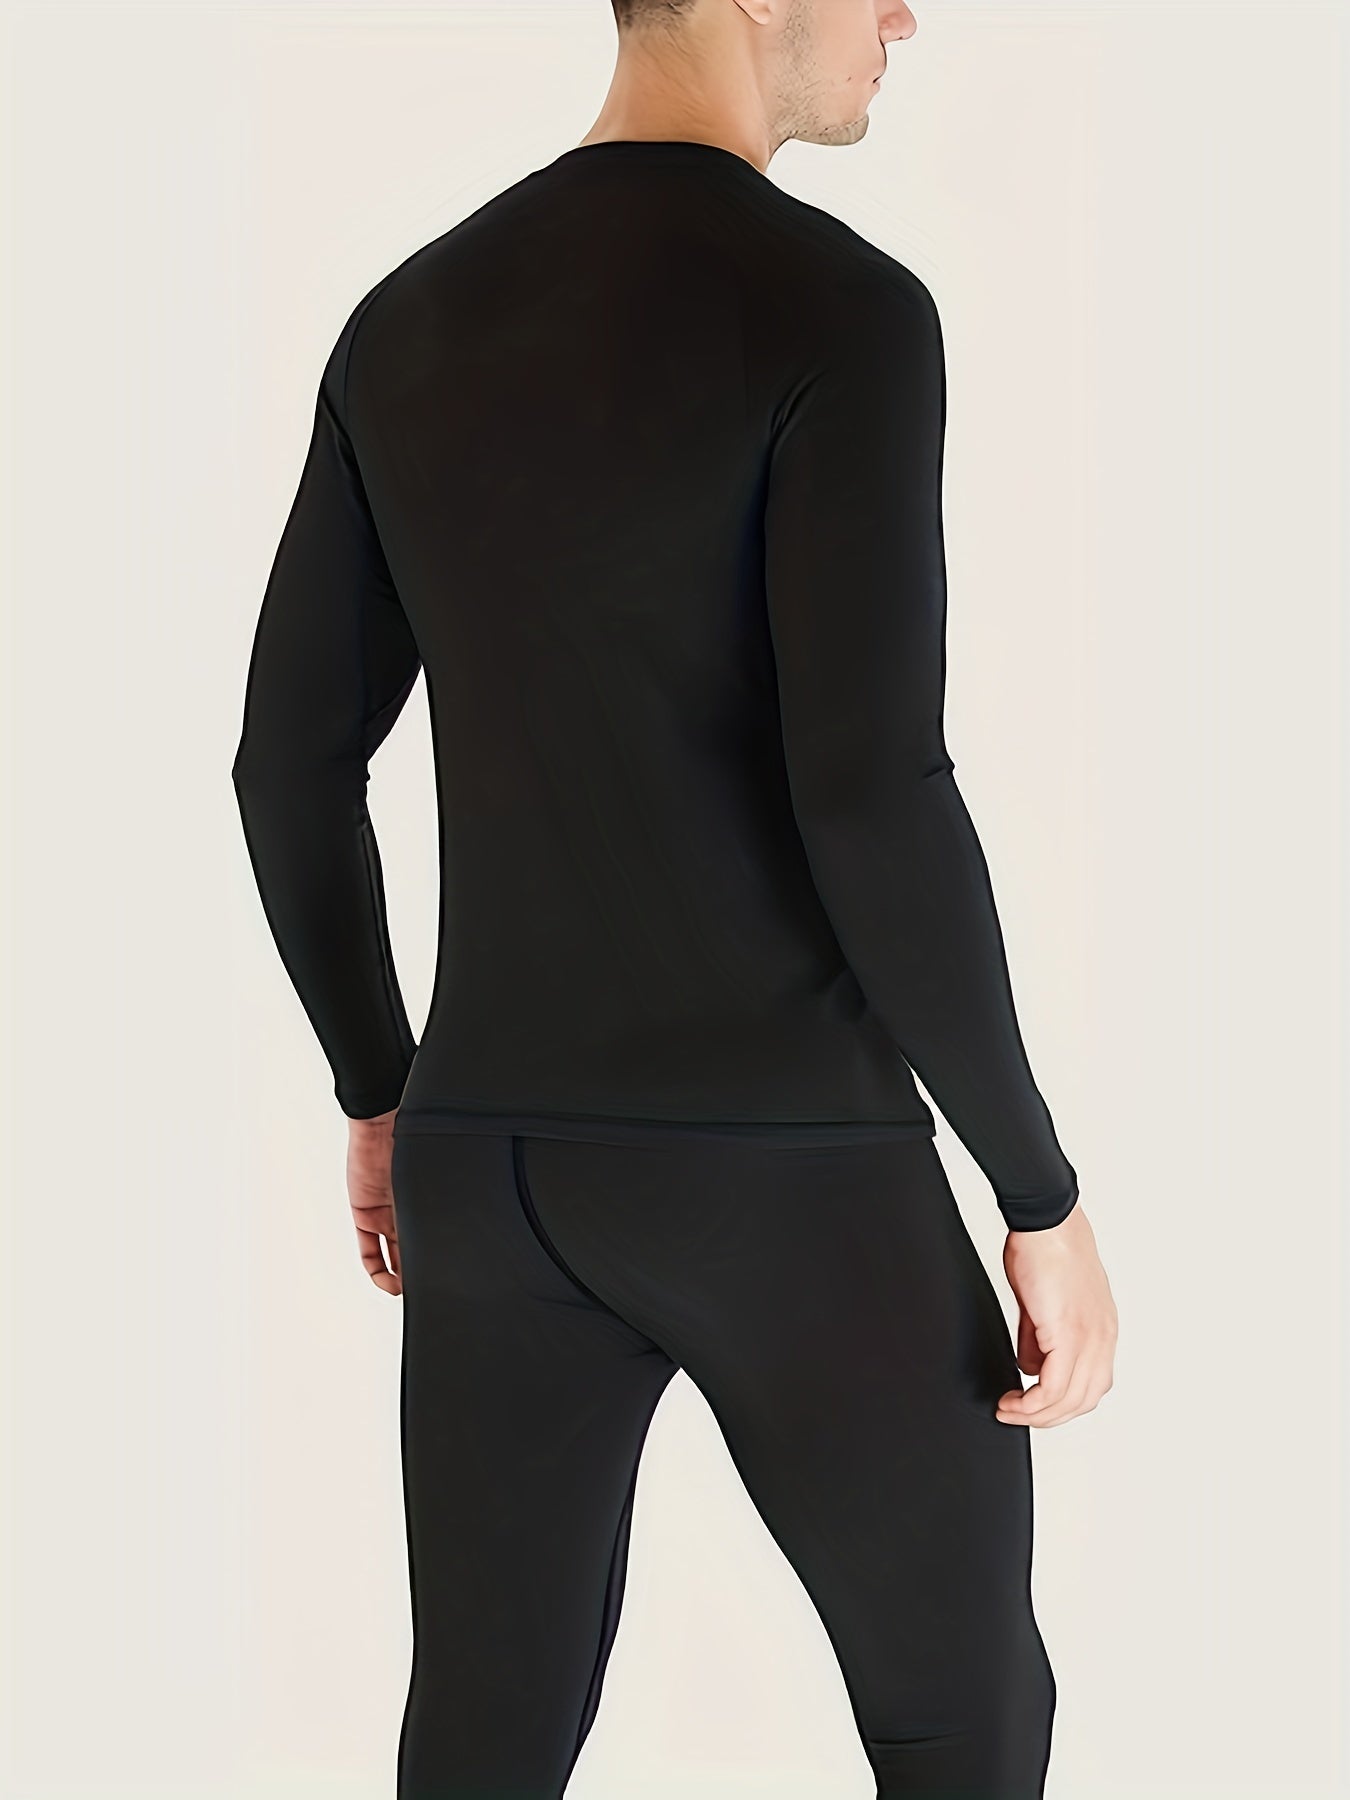 Solid Men's Long Sleeve Thermal Underwear Set For Winter